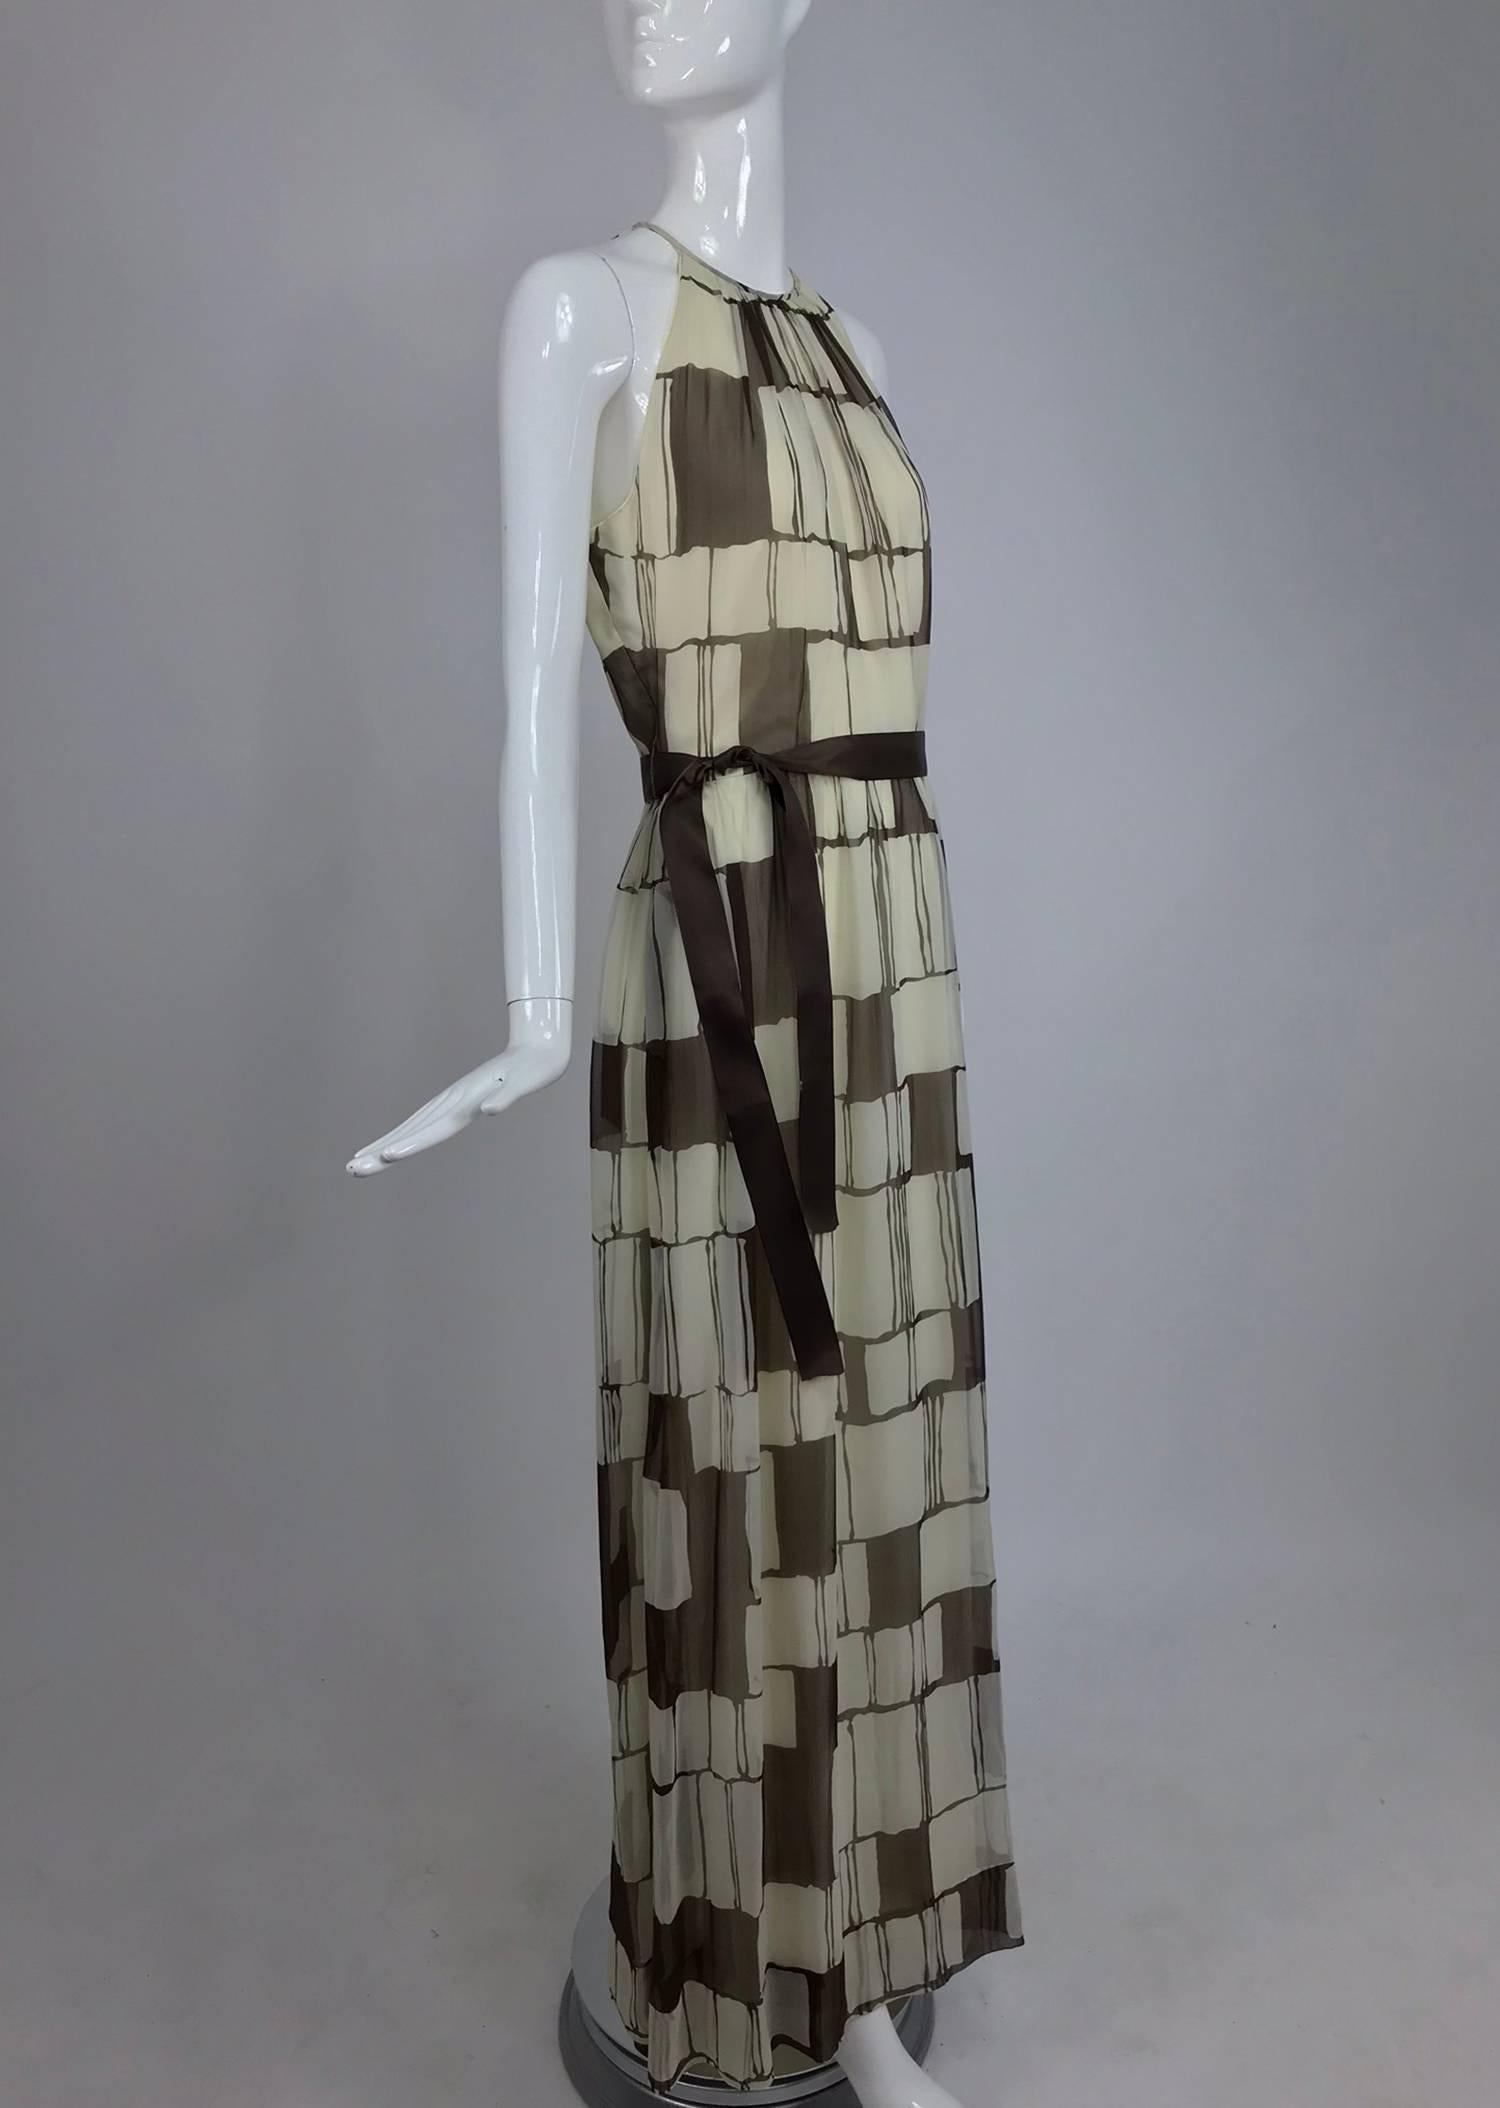 Adele Simpson brown and white silk chiffon halter maxi dress from the 1970s...Brown and white colour blocks create this bold pattern fabric...Halter neck dress shows lots of bare shoulder, it is has deep arm openings...Seamed waist with lightly